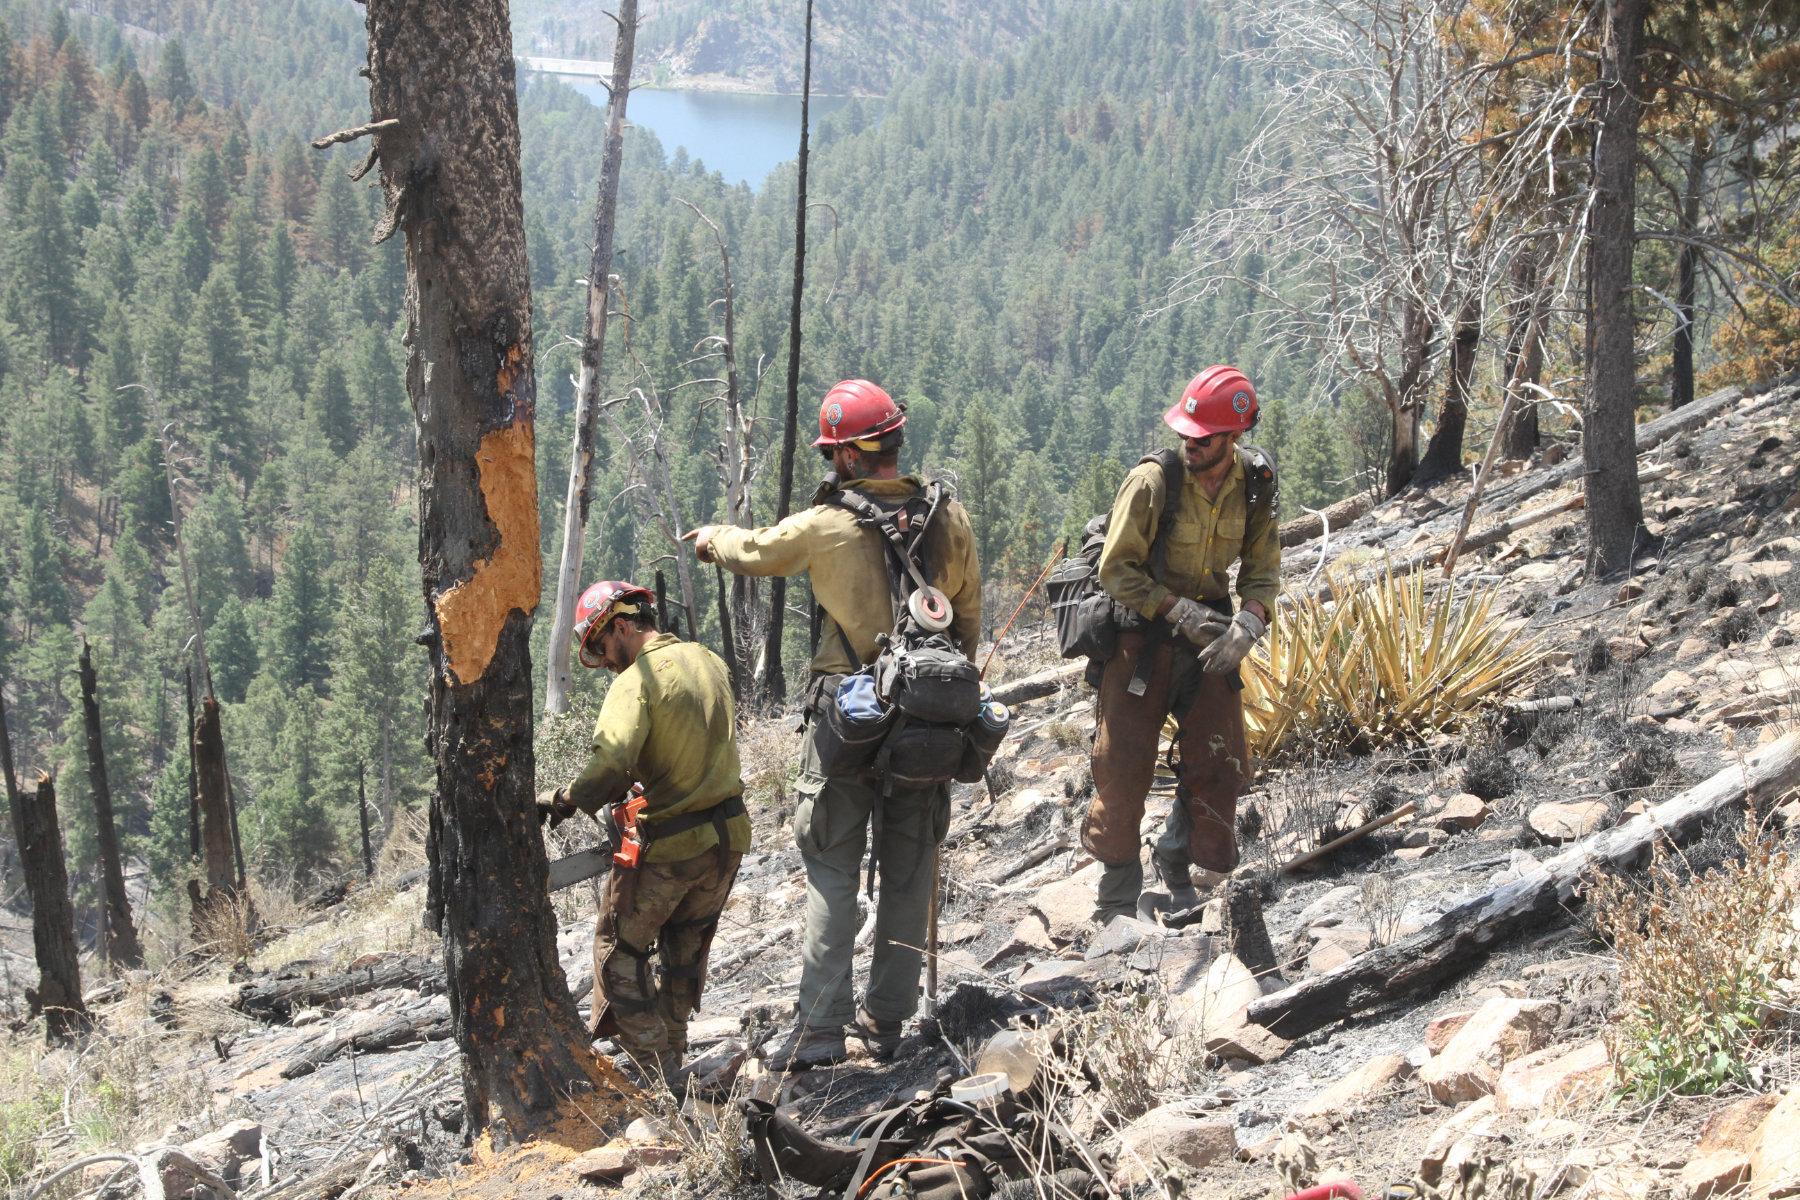 Three wildland fire fighters use a chainsaw to cut down a tree that is burnt halfway through.